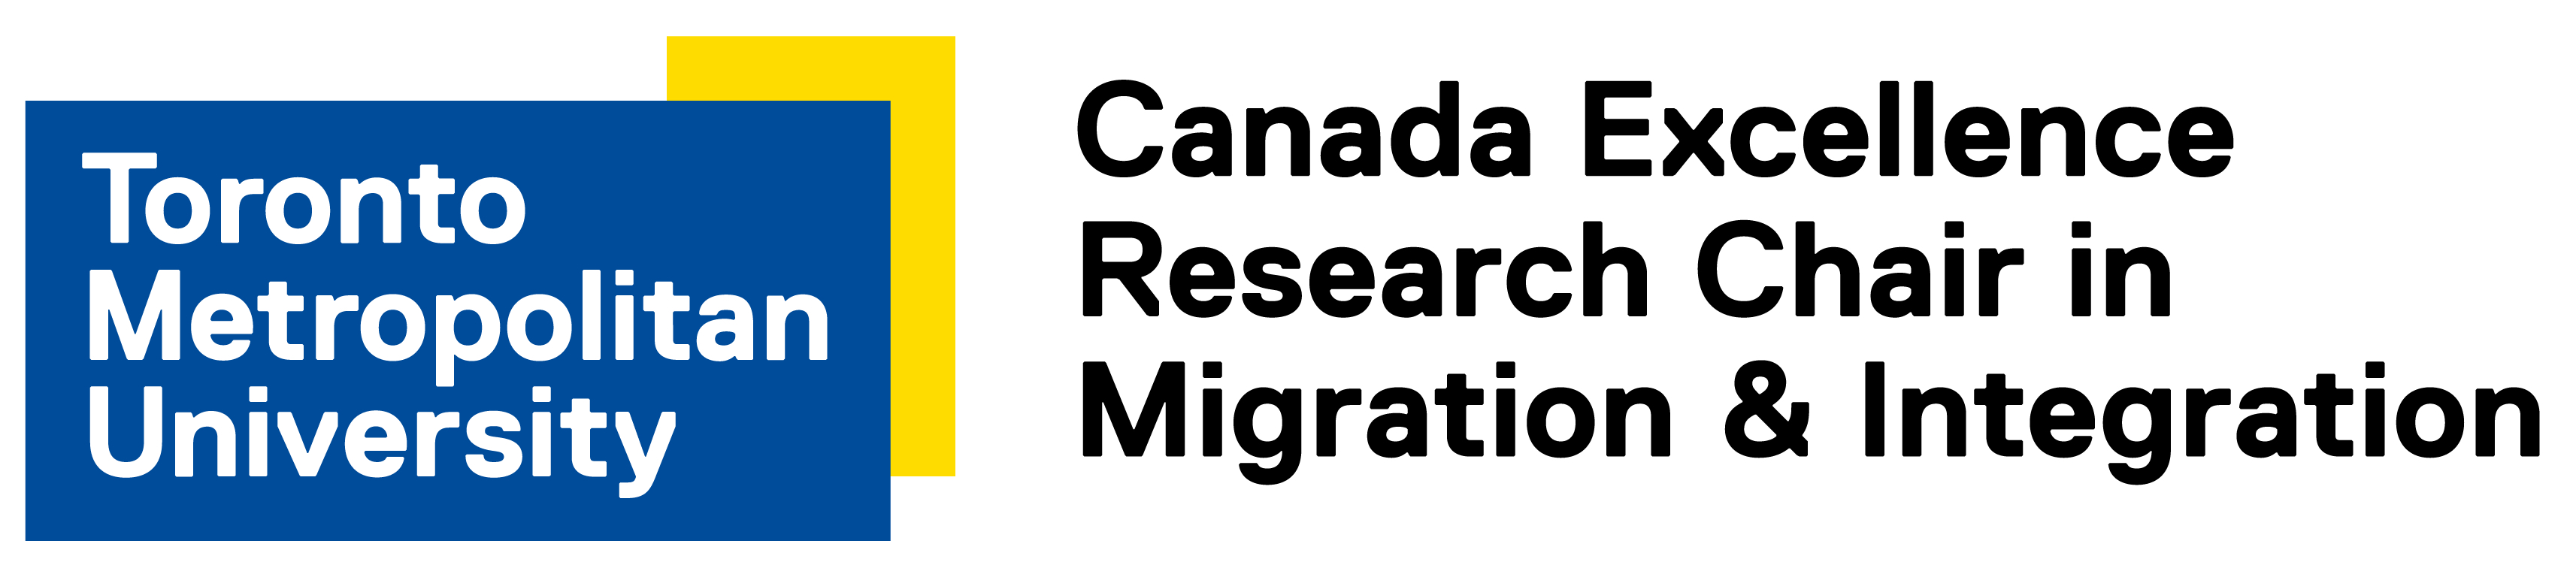 Canada Excellence Research Chair in Migration & Integration at Toronto Metropolitan University